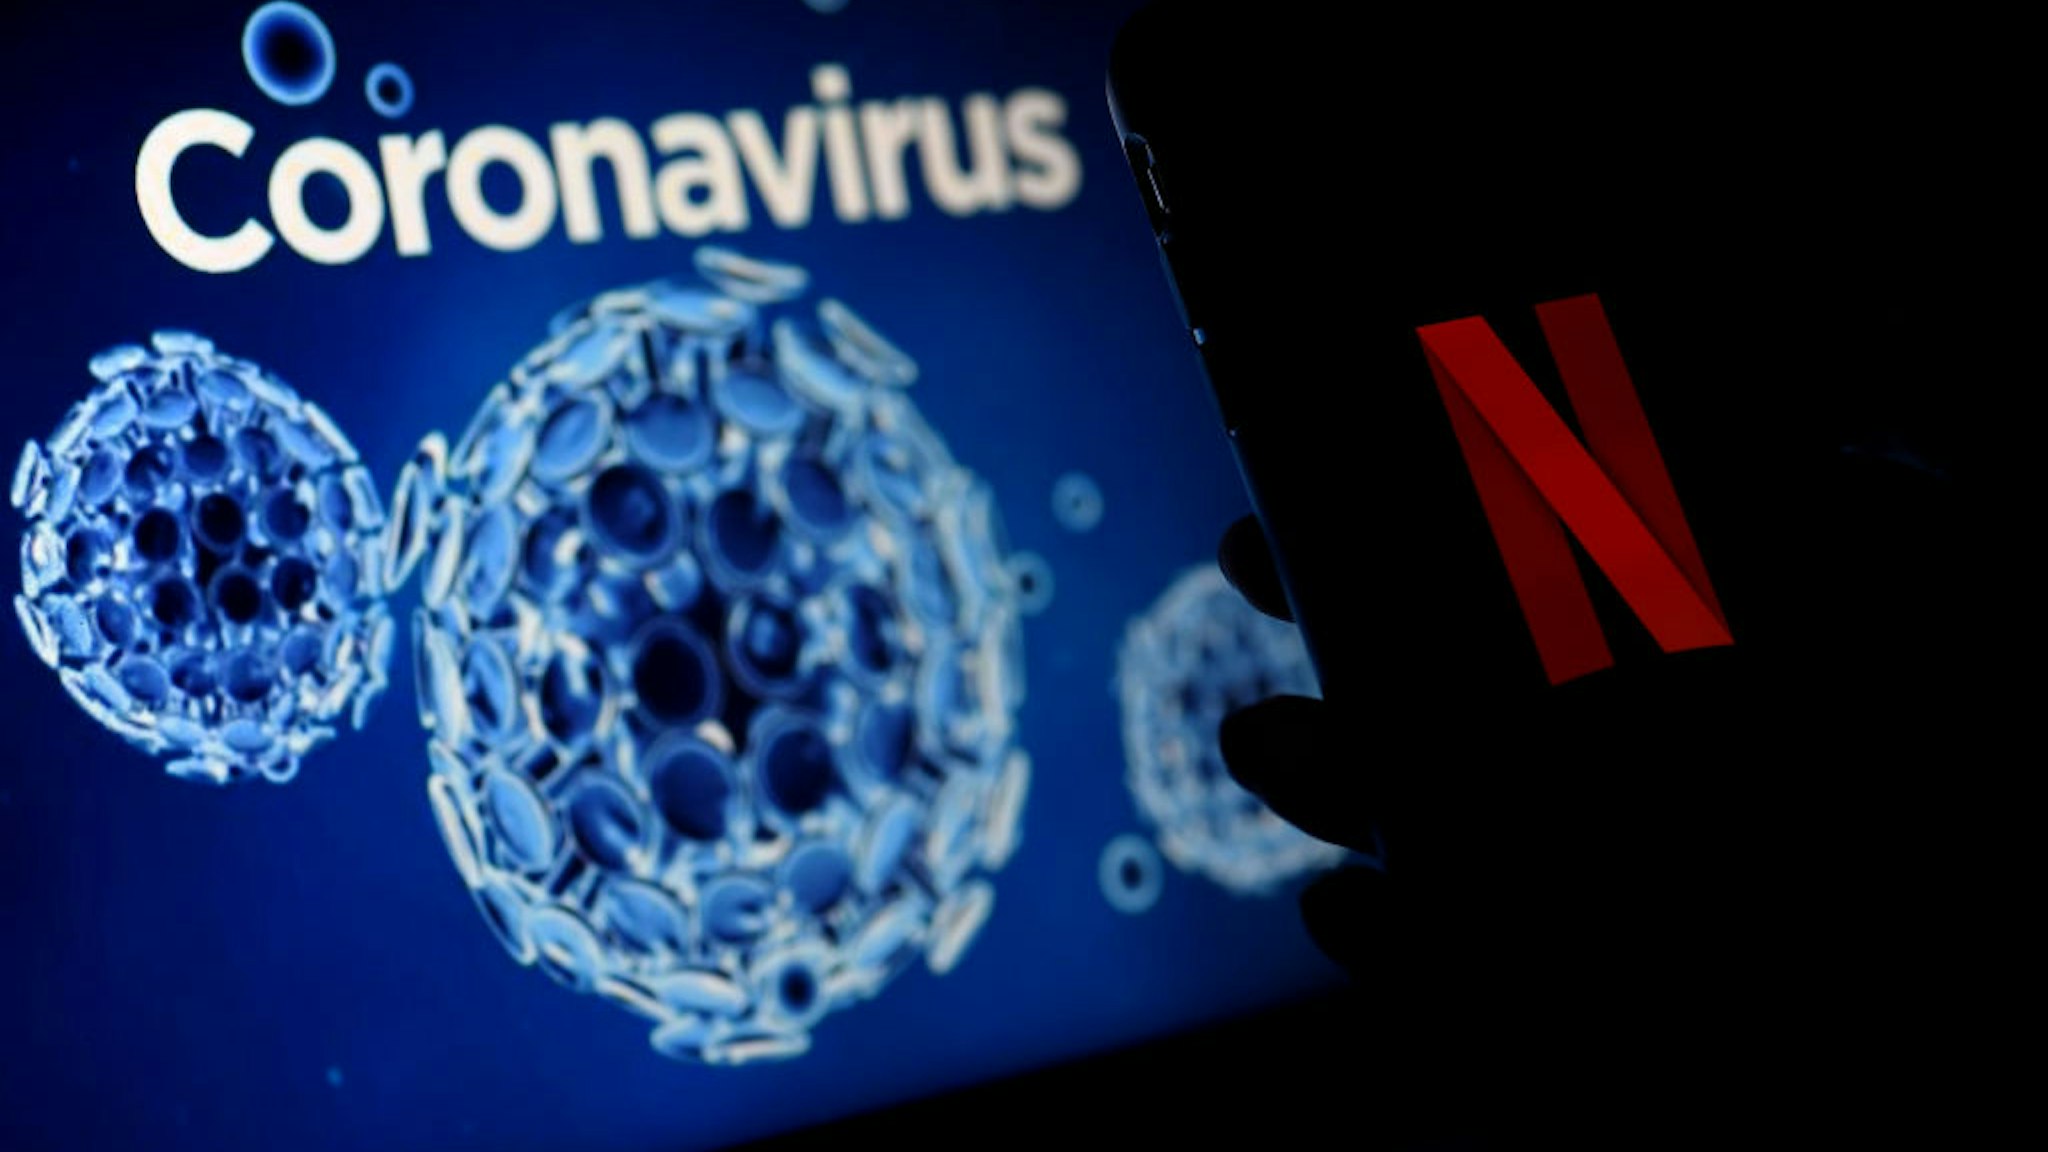 In this photo illustration a mobile phone screens display the Netflix logo on a coronavirus COVID-19 illustration graphic background , March 31, 2020 in Arlington, Virginia.